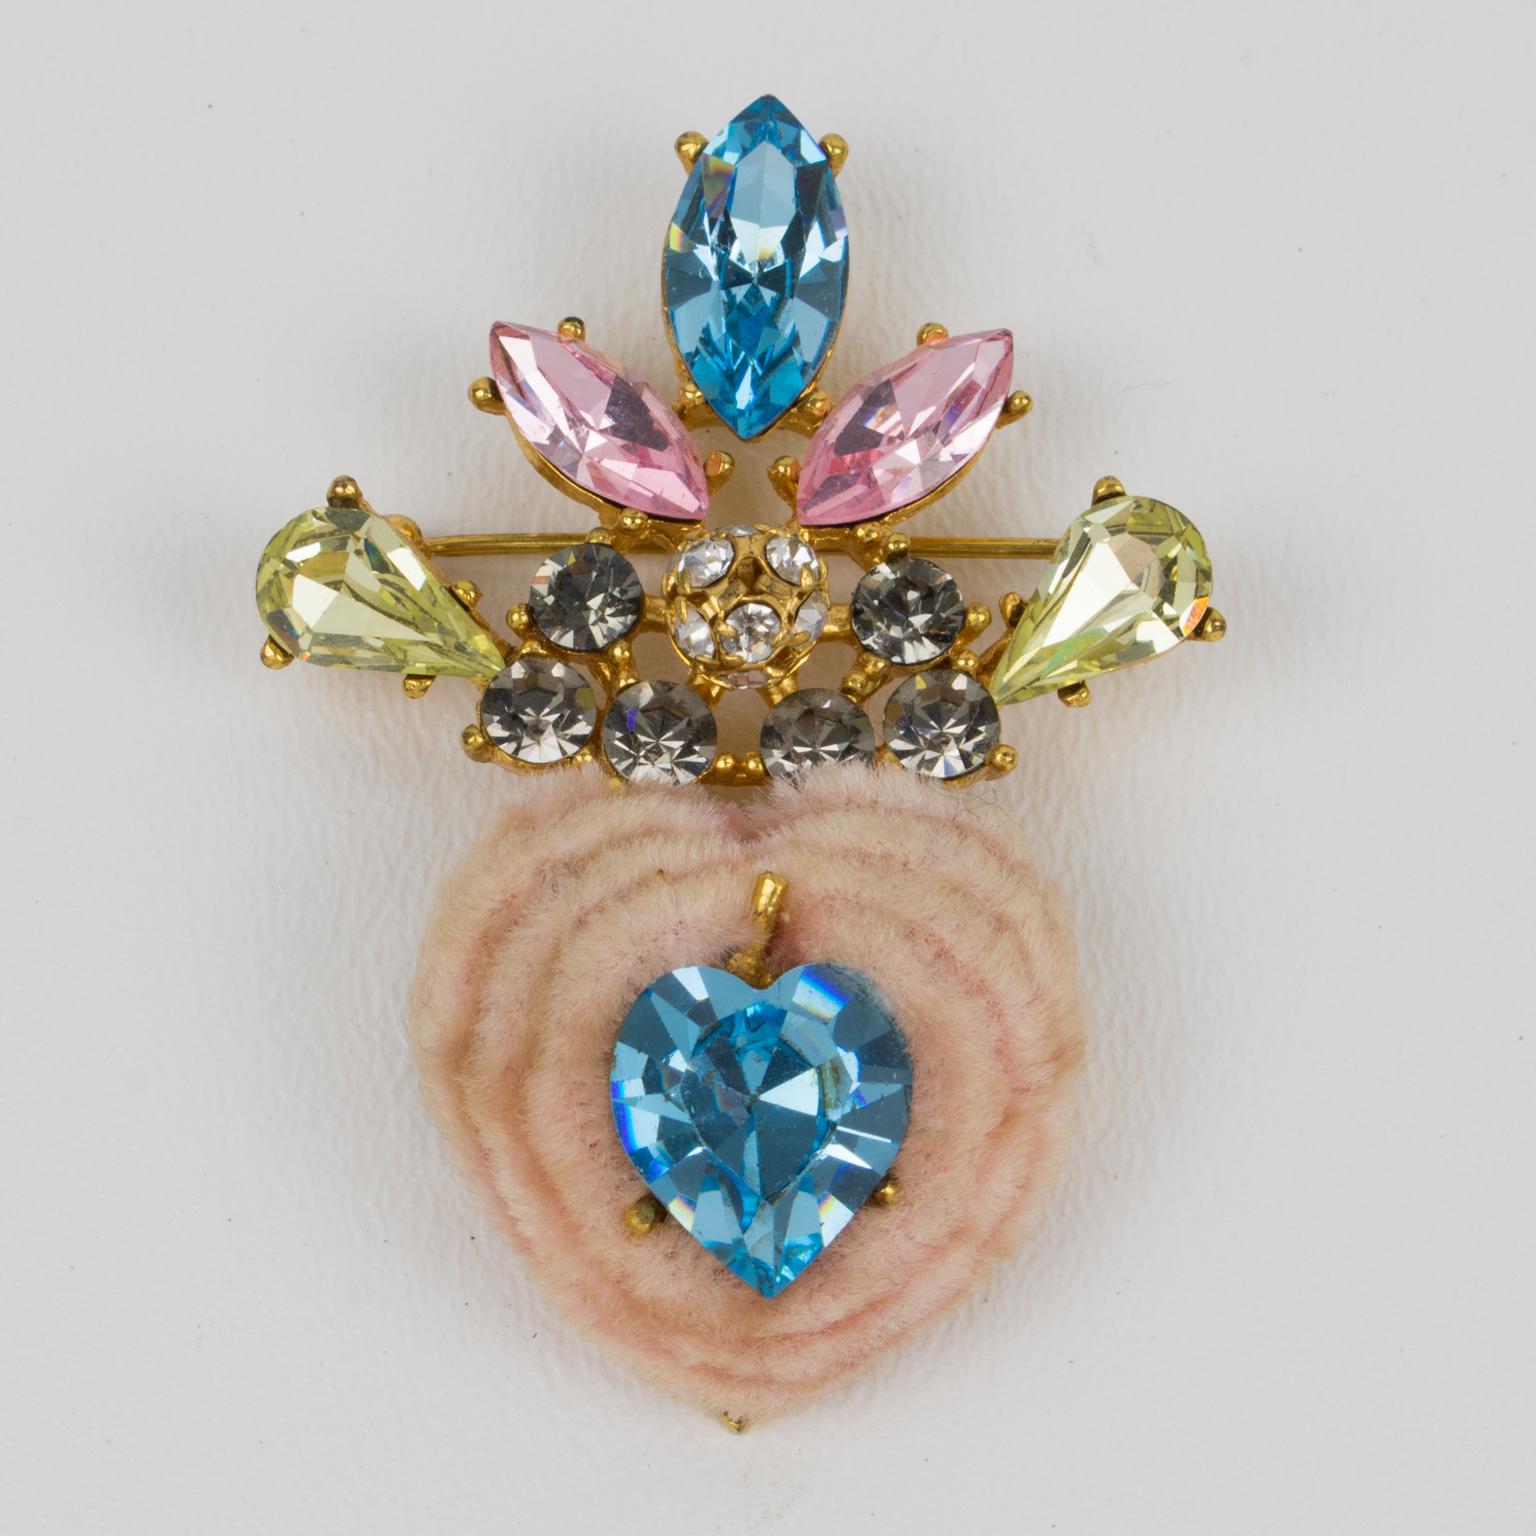 A charming Christian Lacroix Paris heart pin brooch. Romantic stylized heart shape with gilt metal framing ornate with powder pink faux fur and a large arctic blue crystal heart-shaped rhinestone on its center. The faux fur heart is topped with a